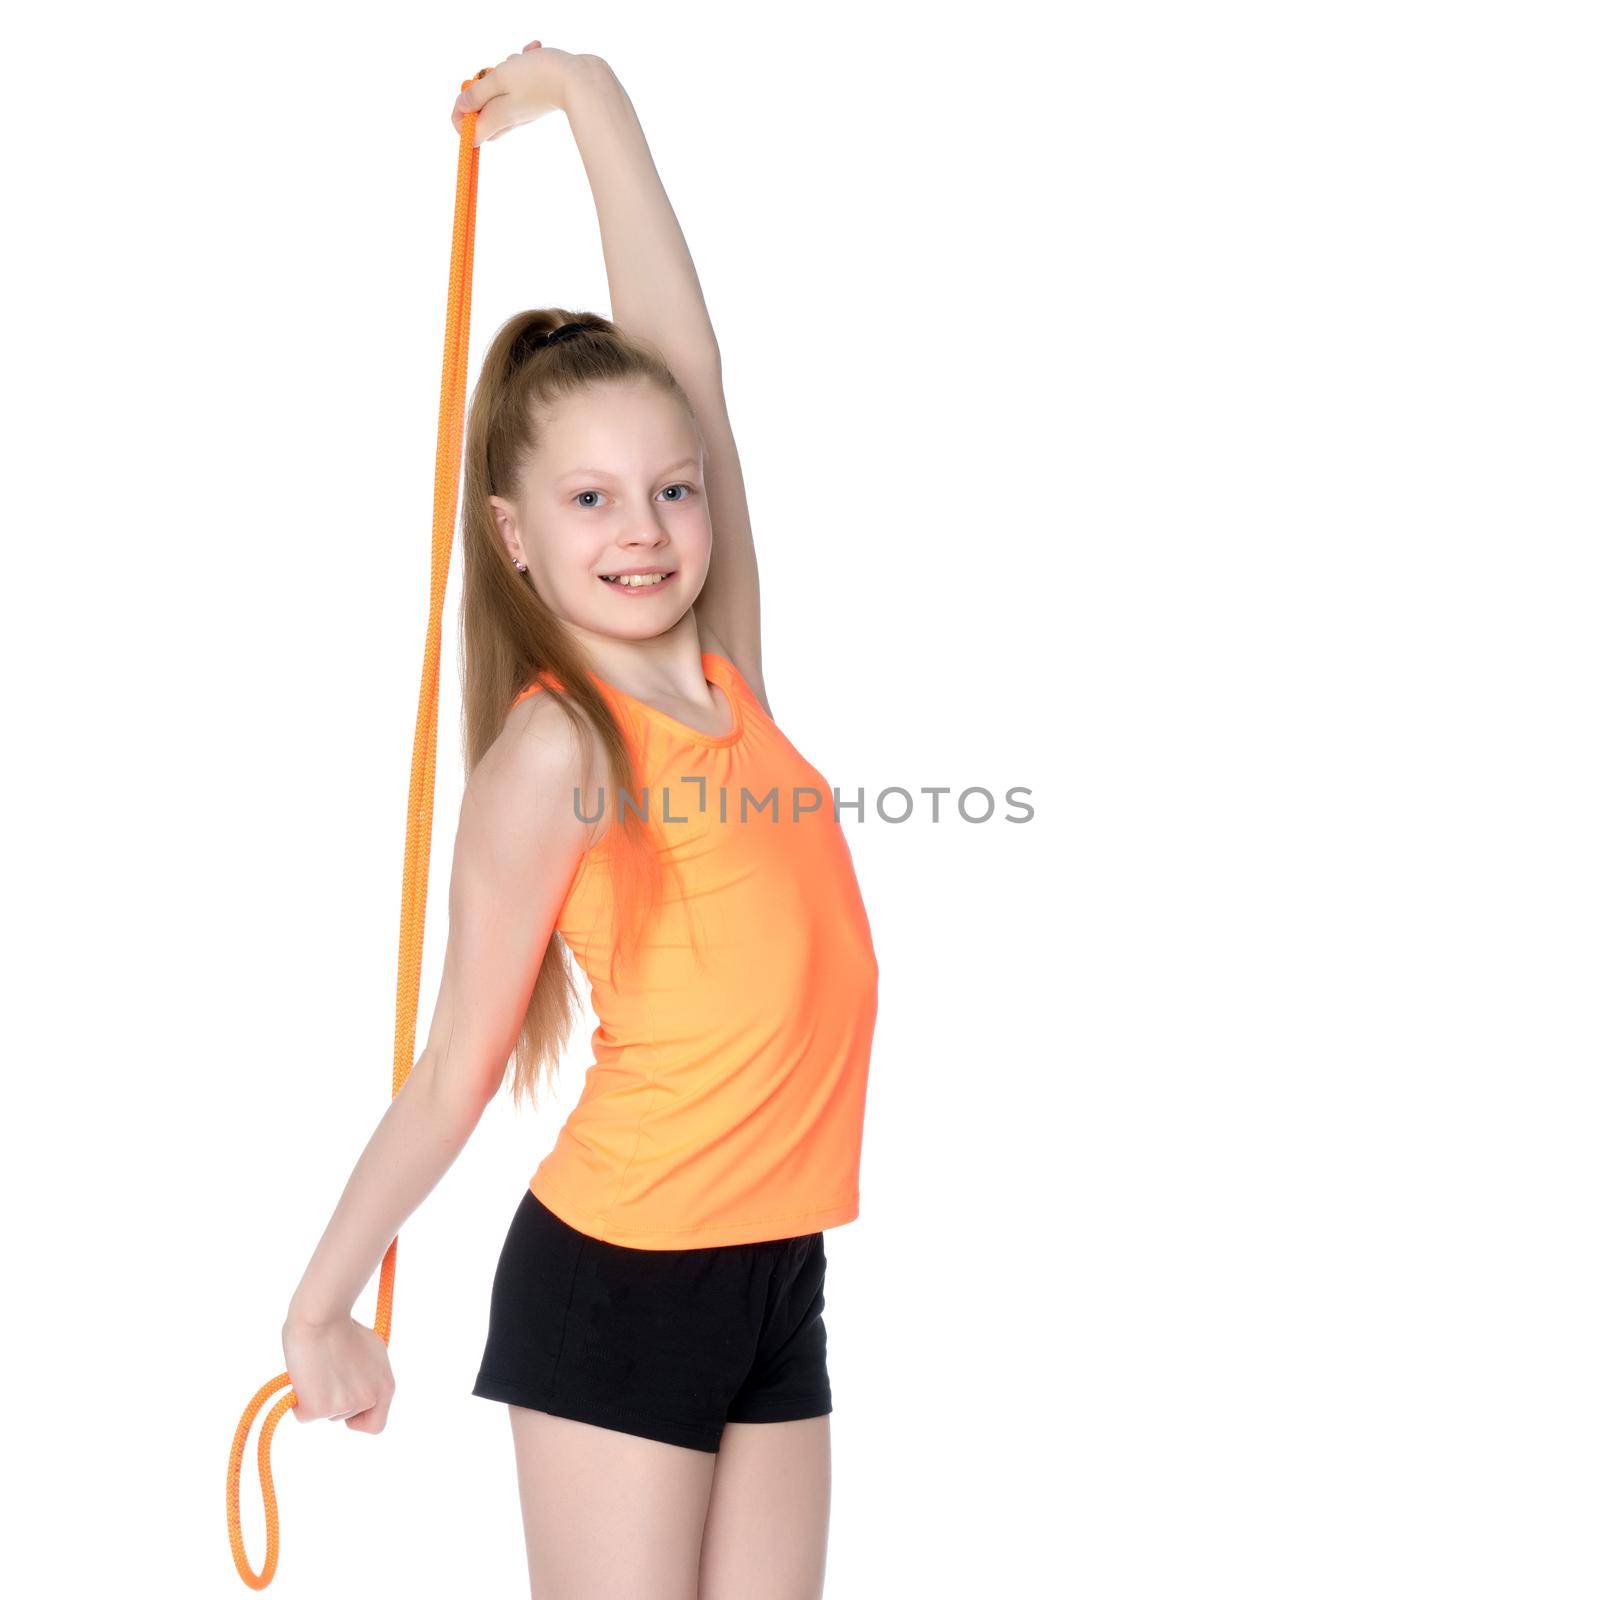 A girl gymnast performs exercises with a skipping rope. by kolesnikov_studio